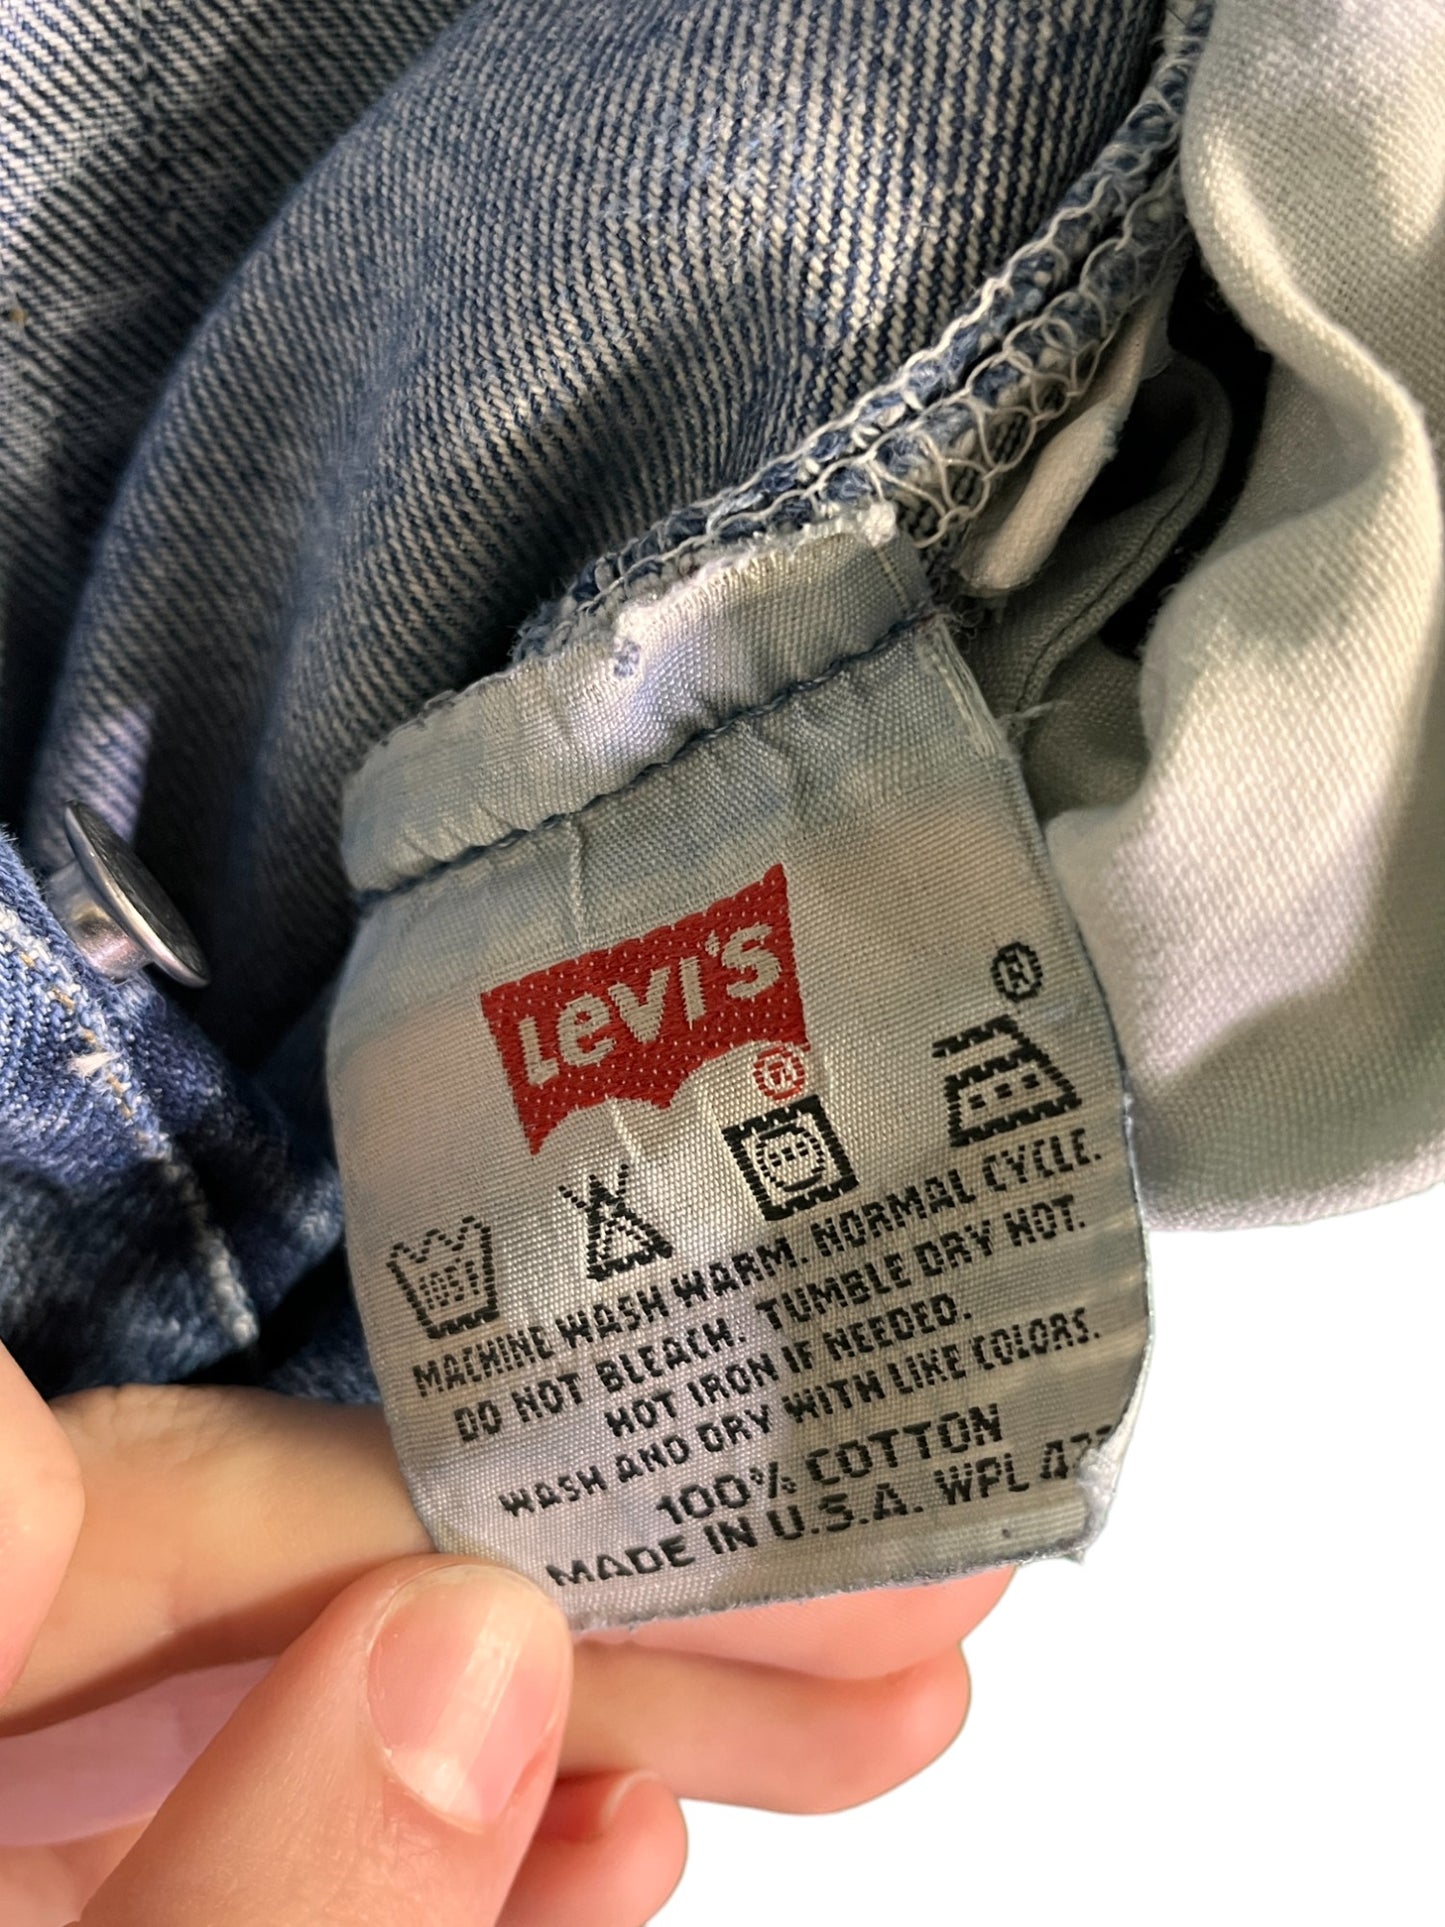 Vintage Levi's 501 Made in USA Medium Wash Straight Leg Jeans Size 31x33